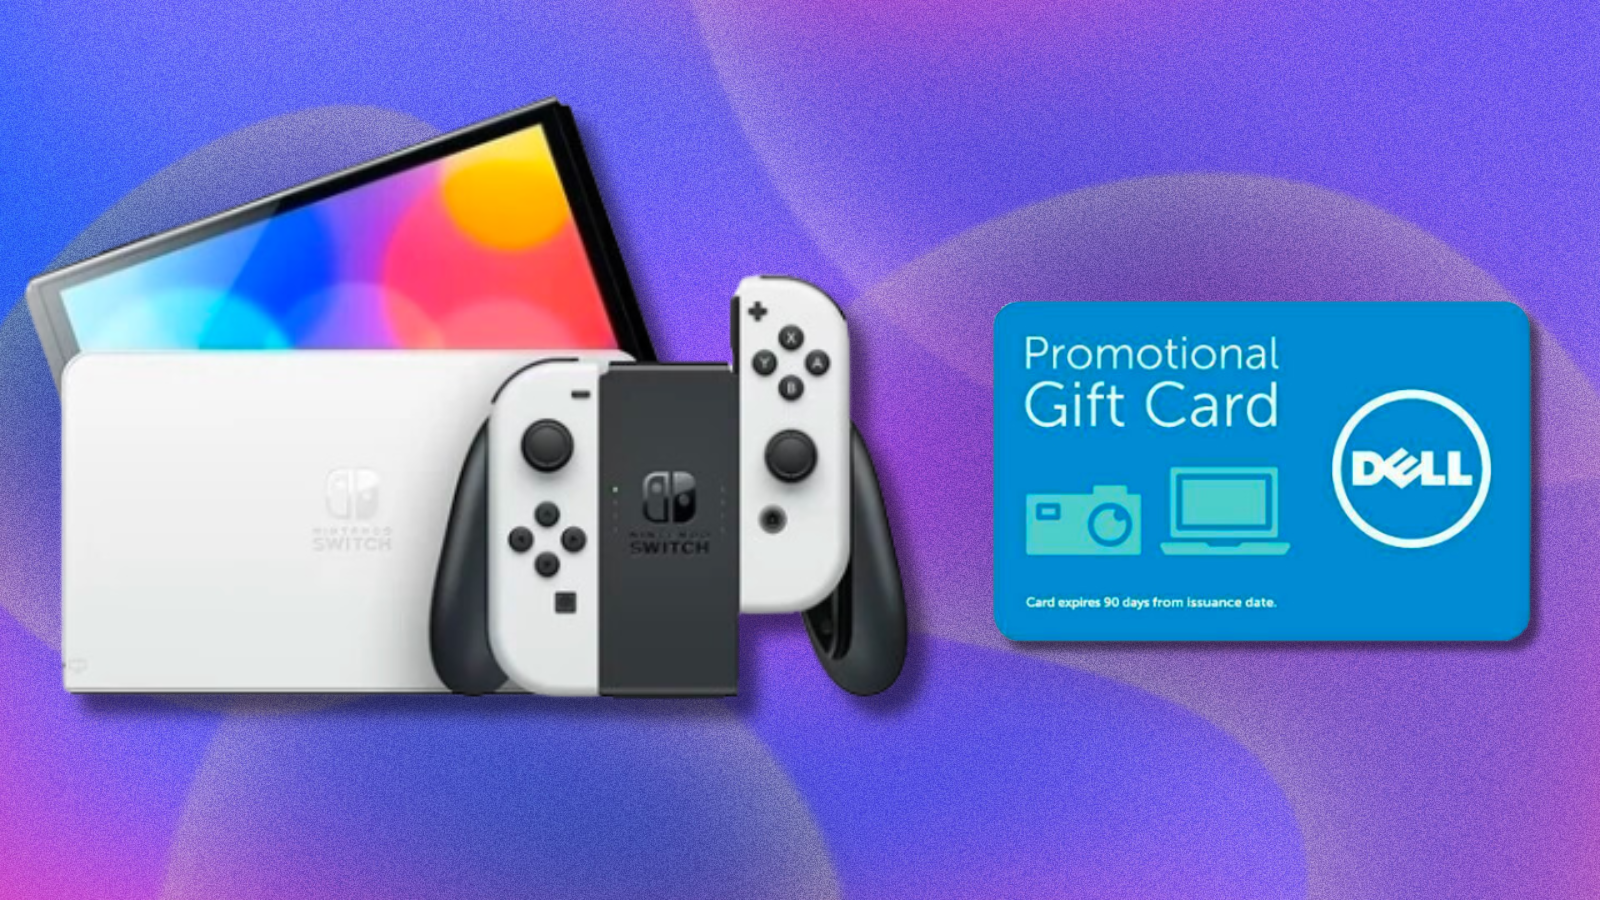 Nintendo Switch OLED and Dell eGift Card on blue and purple abstract background